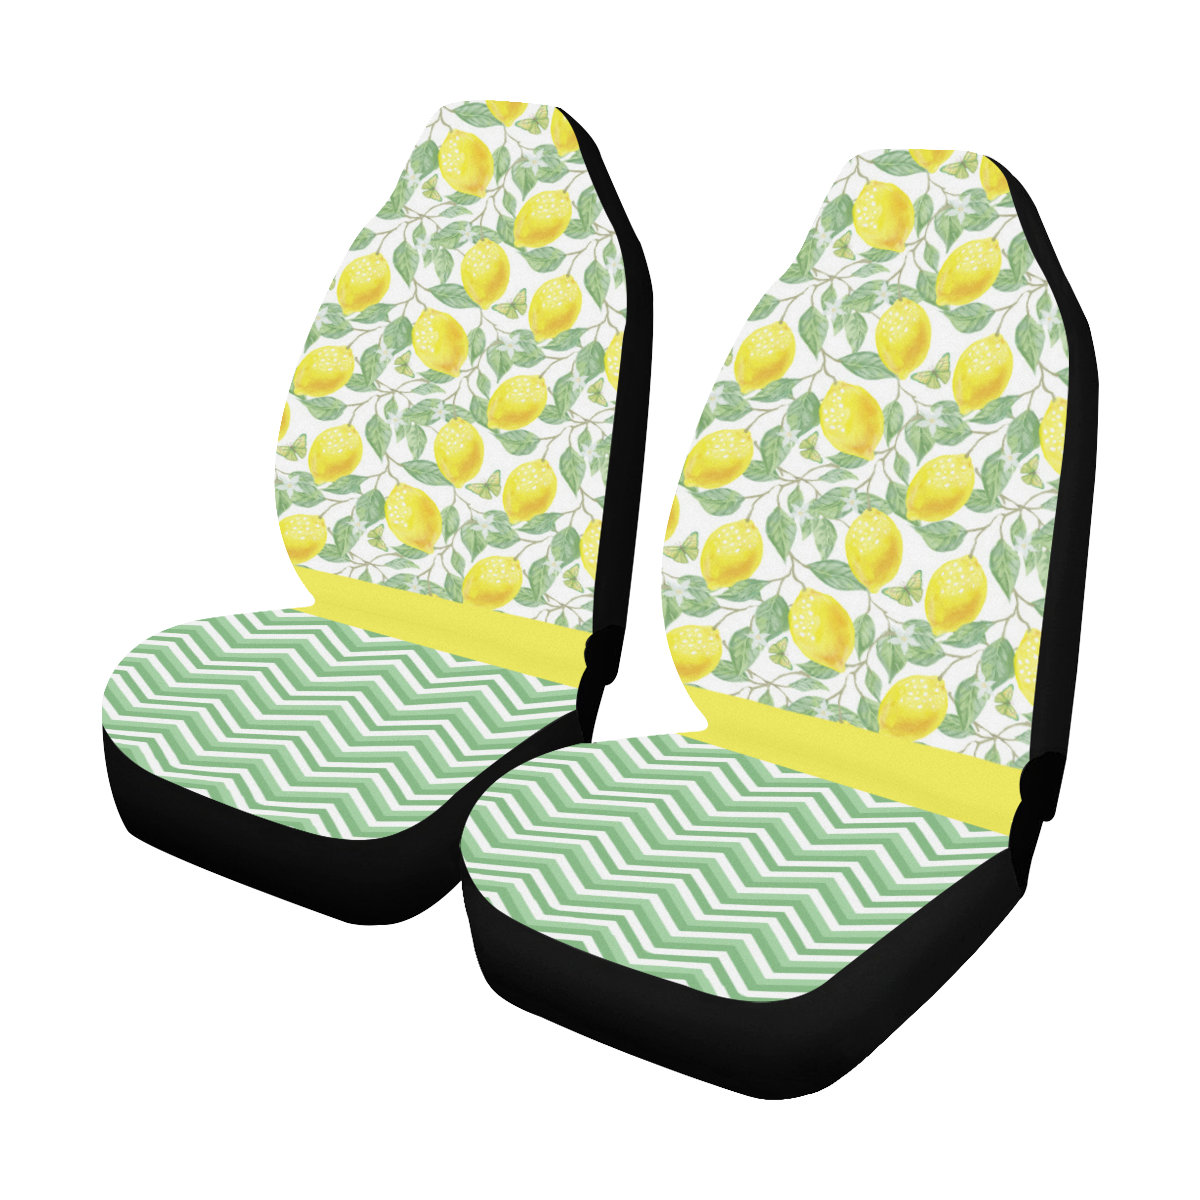 Lemons With Chevron 2 Car Seat Covers (Set of 2)